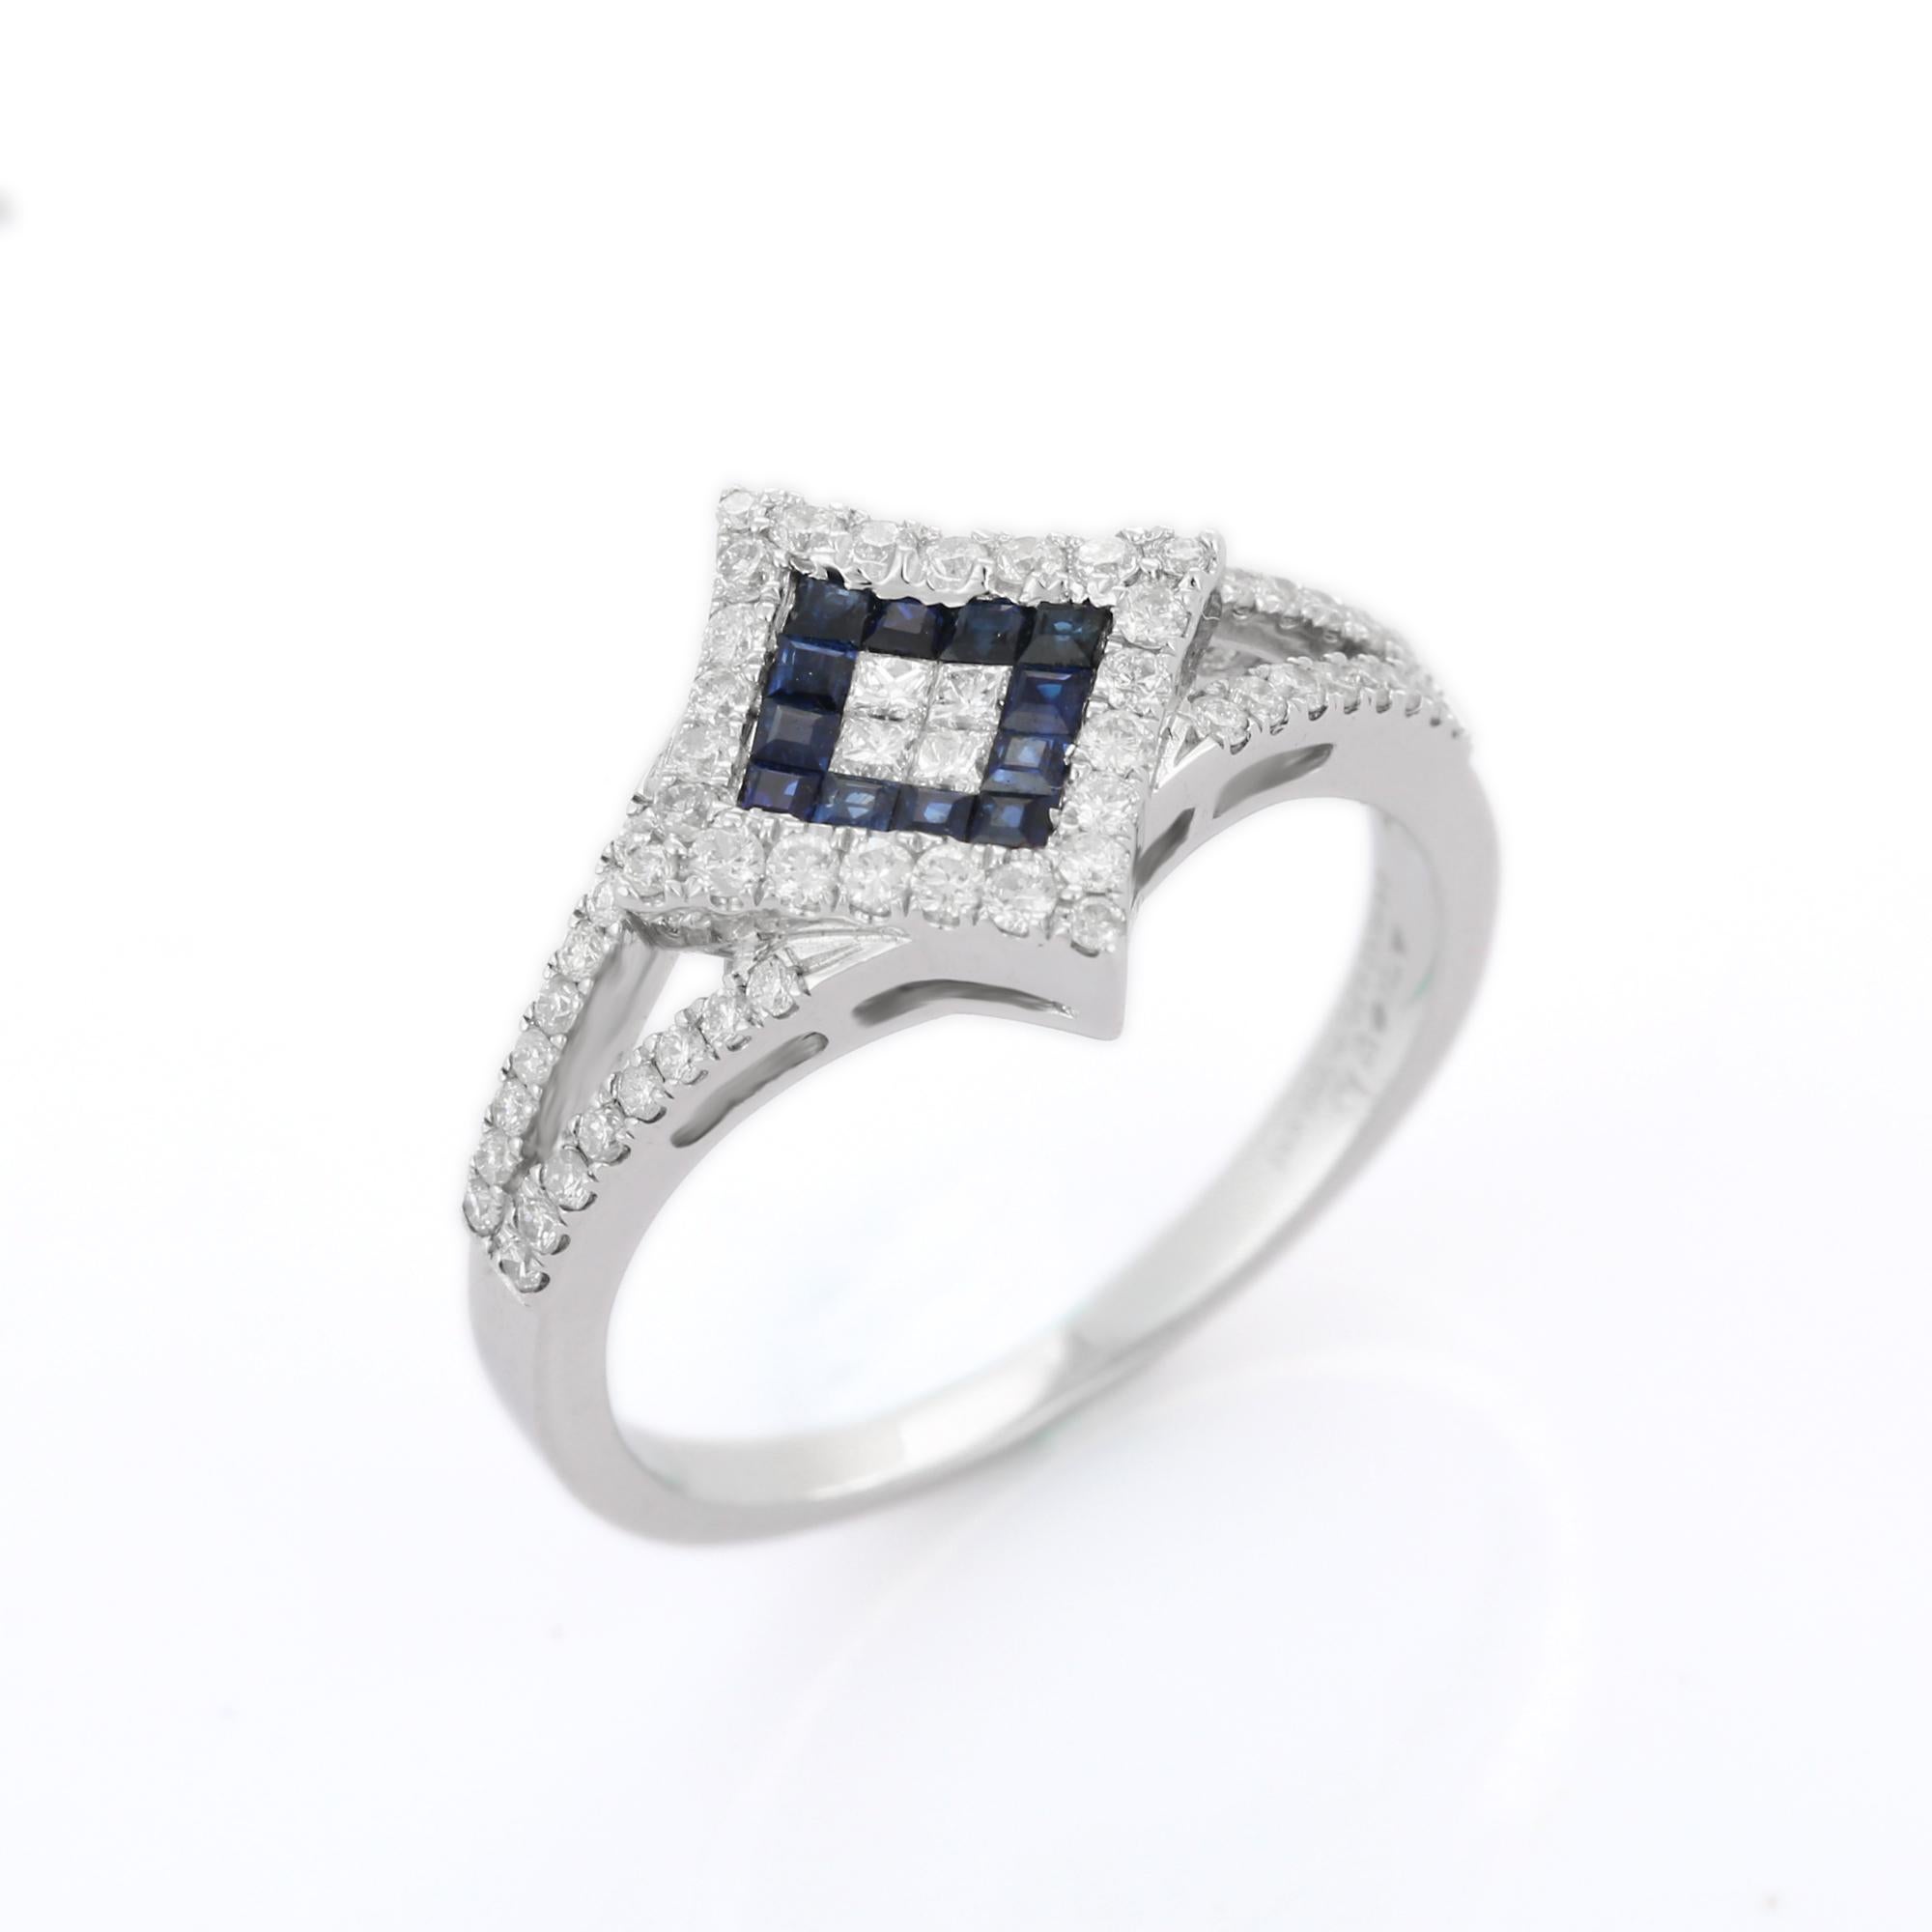 For Sale:  Solid 18k White Gold Square Blue Sapphire Diamond Women's Engagement Ring  5